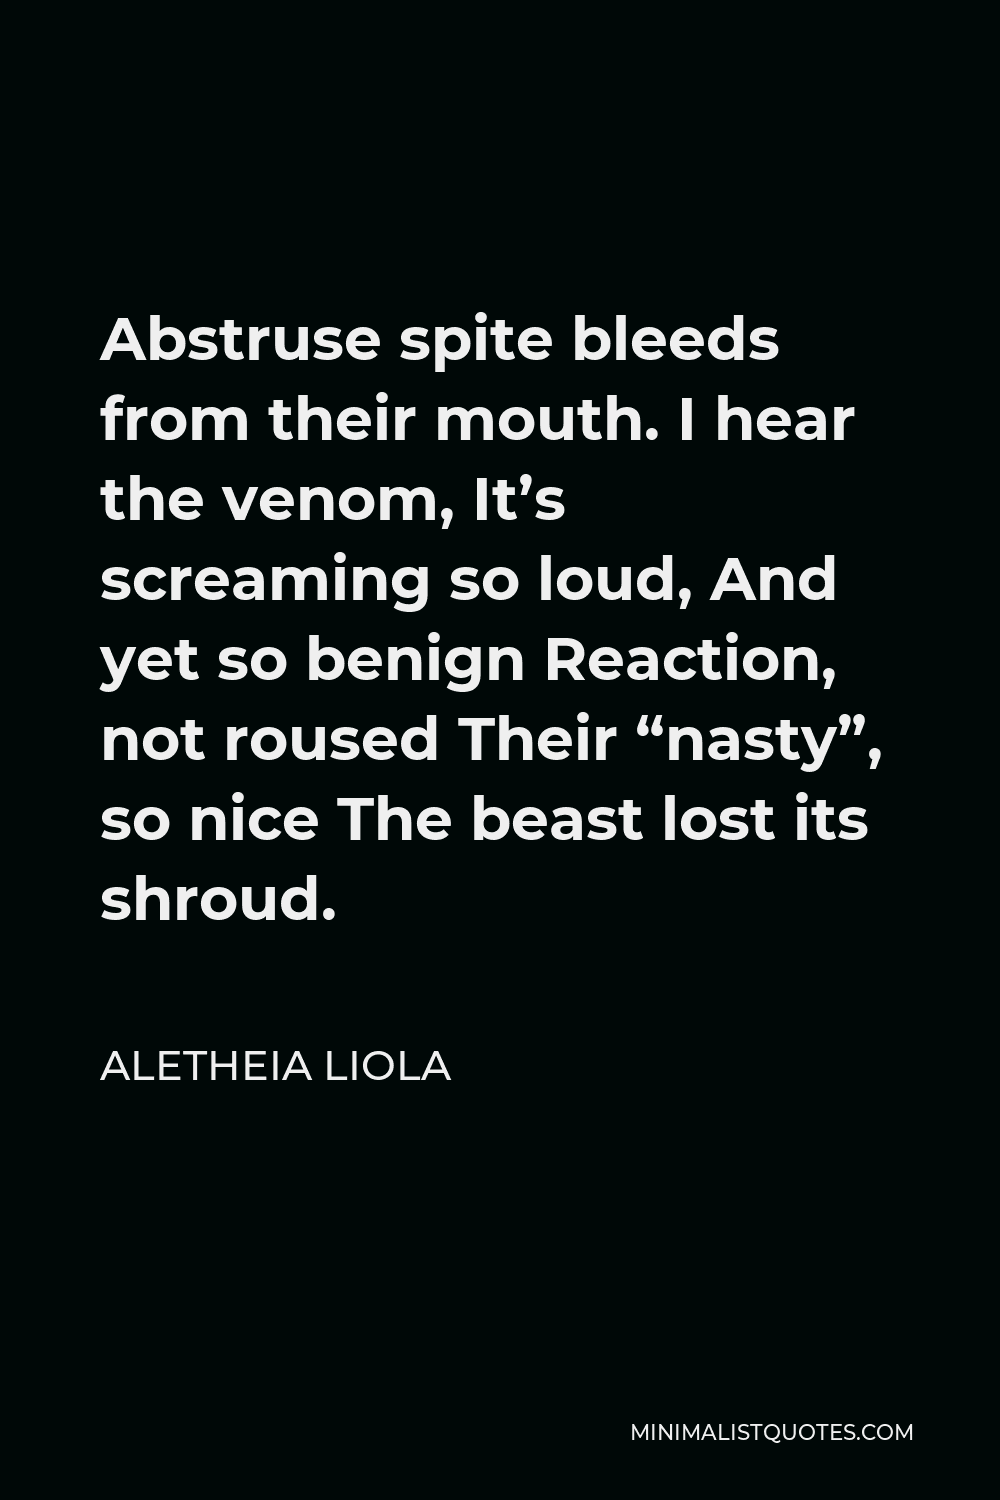 Aletheia Liola Quote - Abstruse spite bleeds from their mouth. I hear the venom, It’s screaming so loud, And yet so benign Reaction, not roused Their “nasty”, so nice The beast lost its shroud.